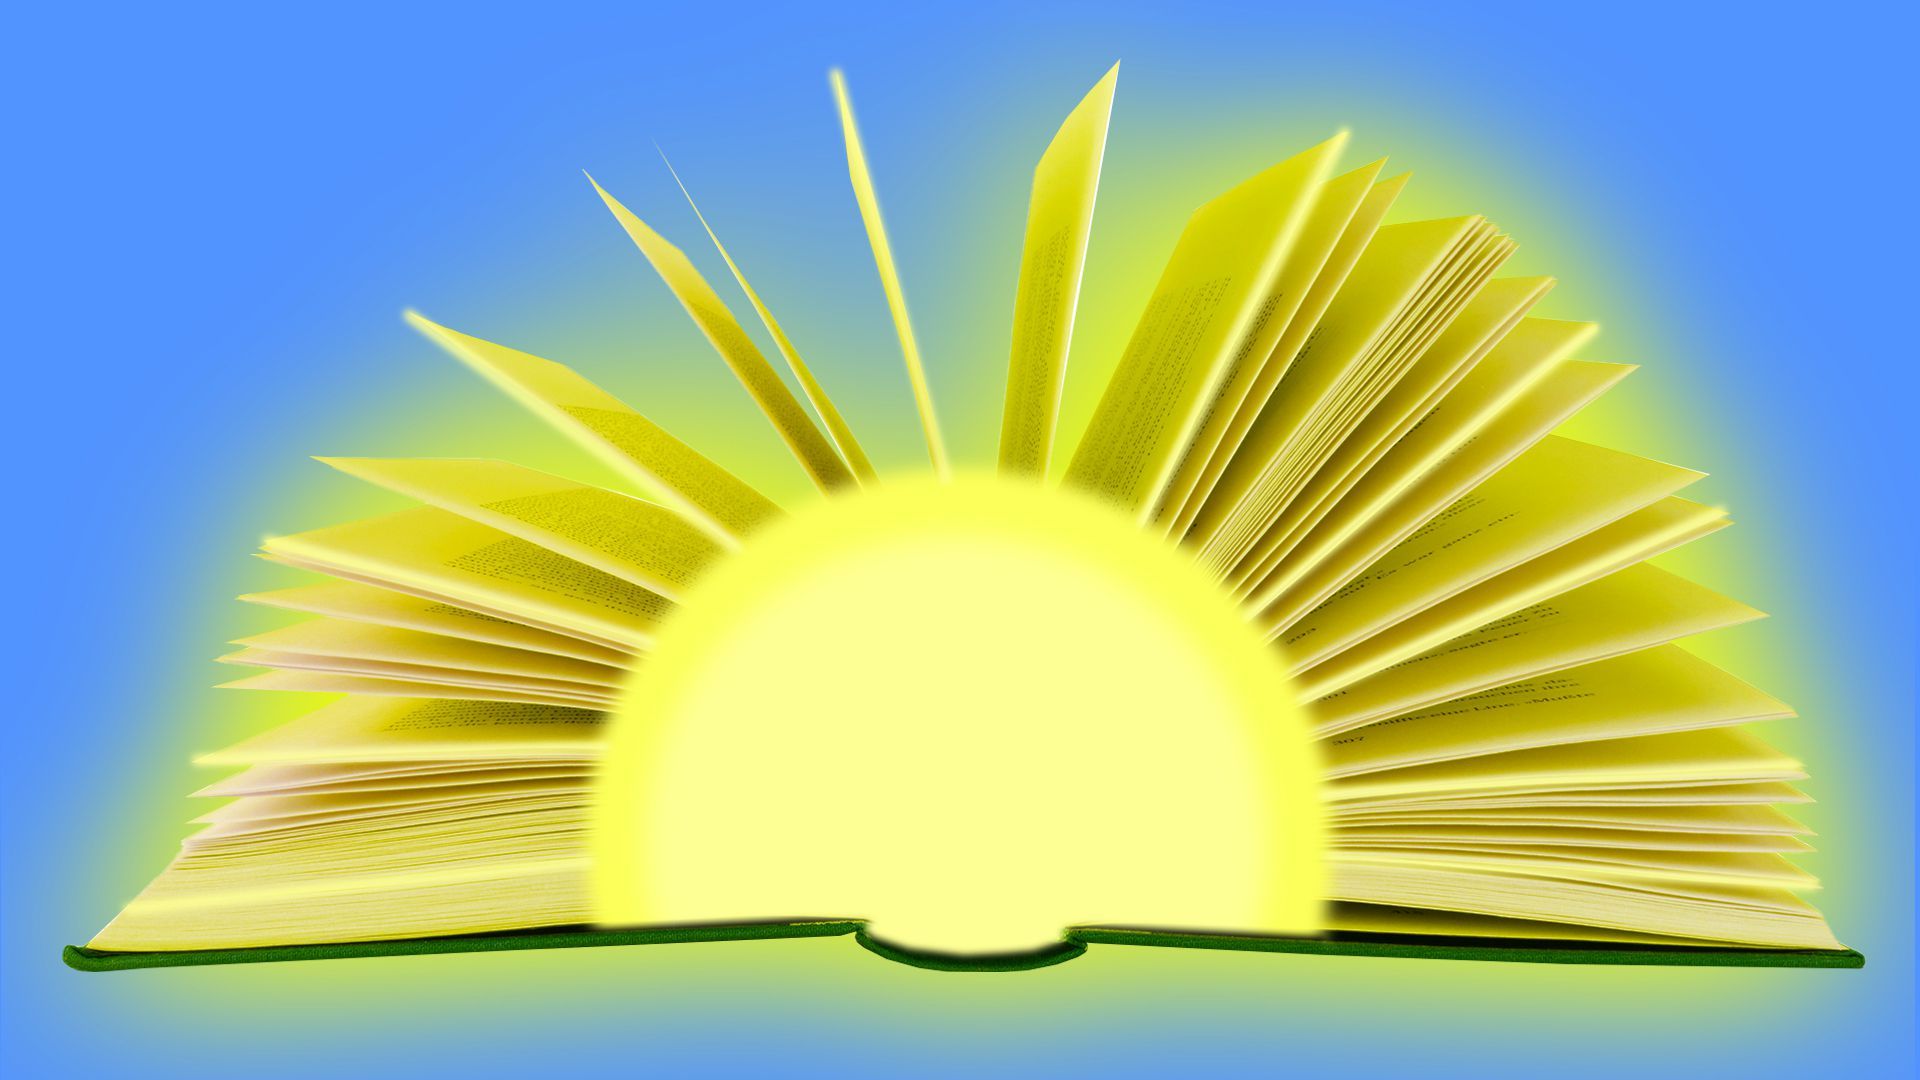 Illustration of a sun with rays made from an open book